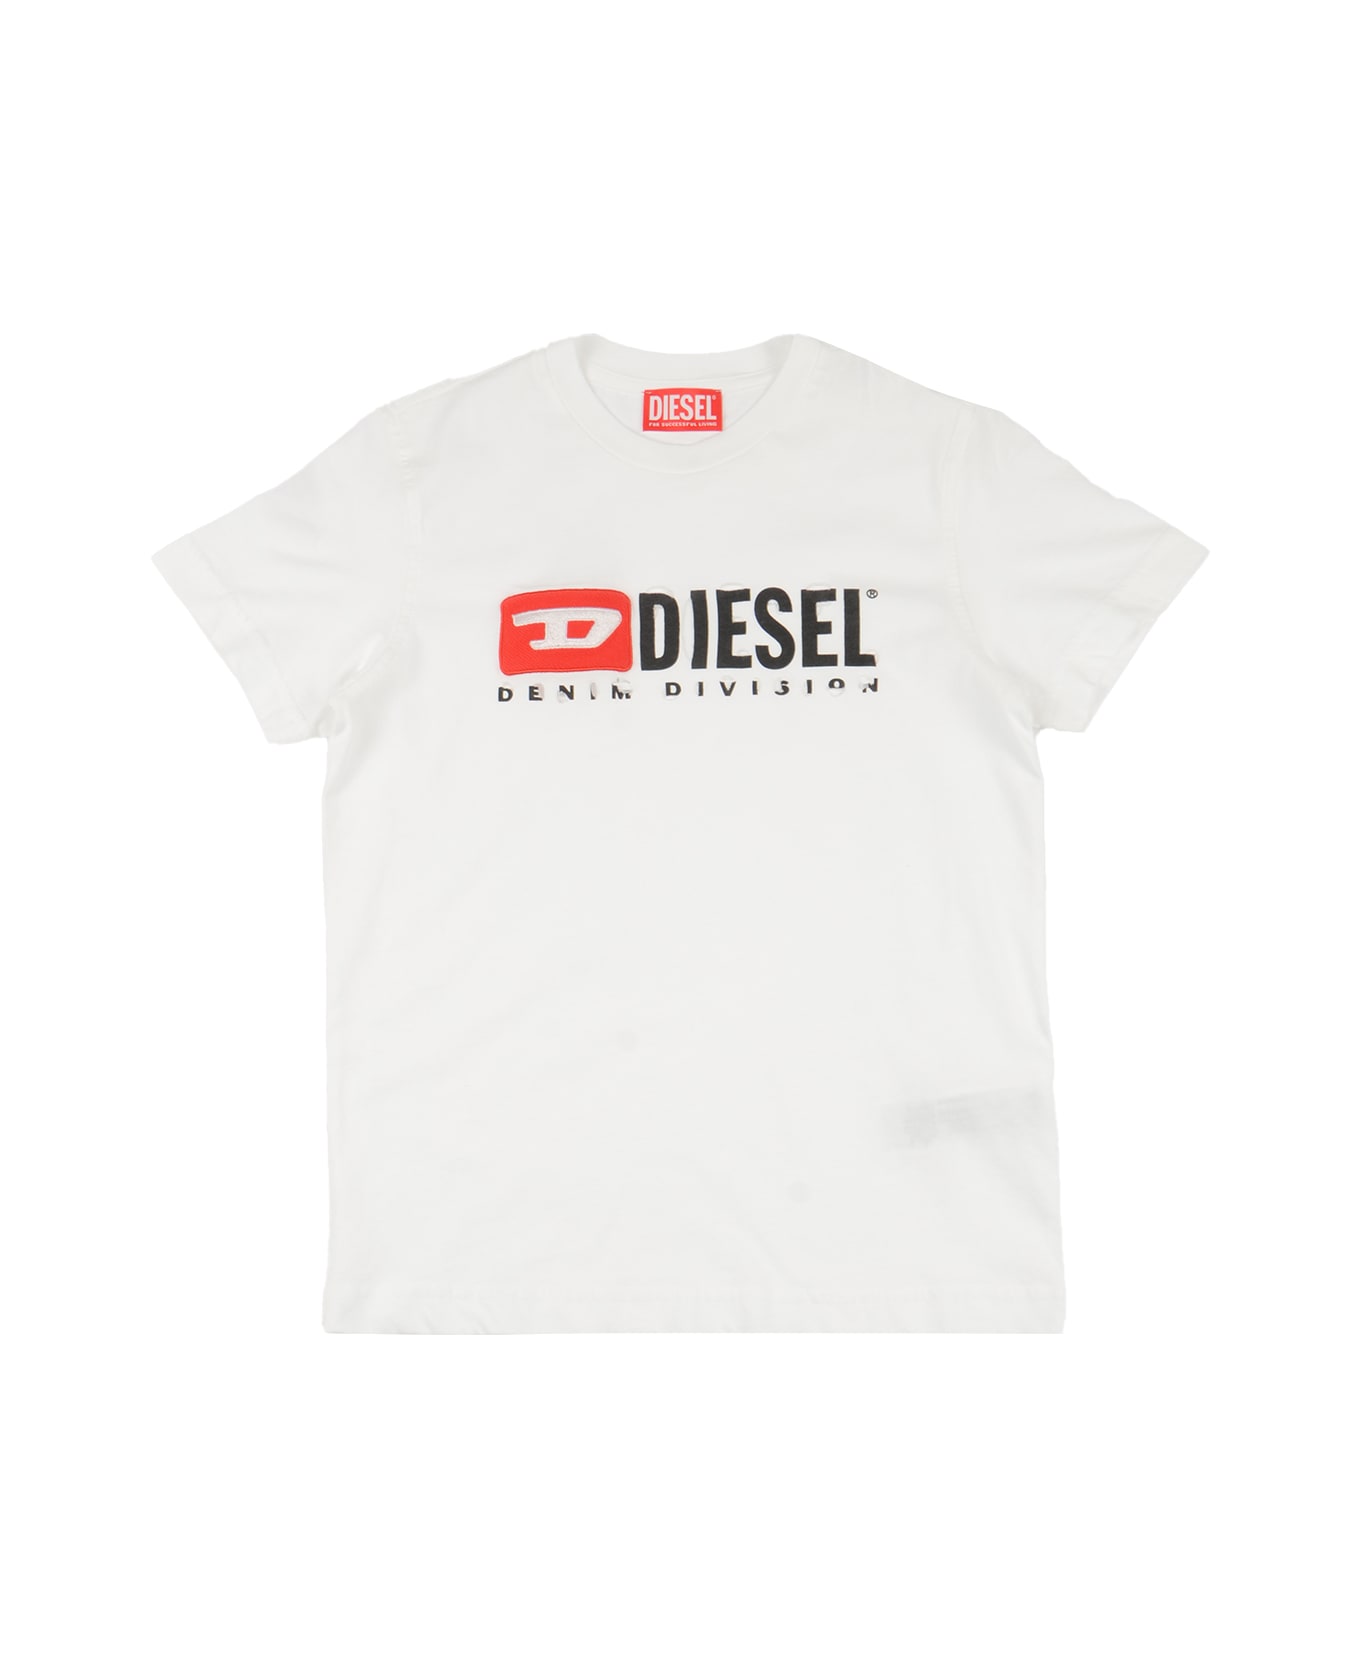 Diesel Tinydivstroyed T-shirt Tシャツ＆ポロシャツ